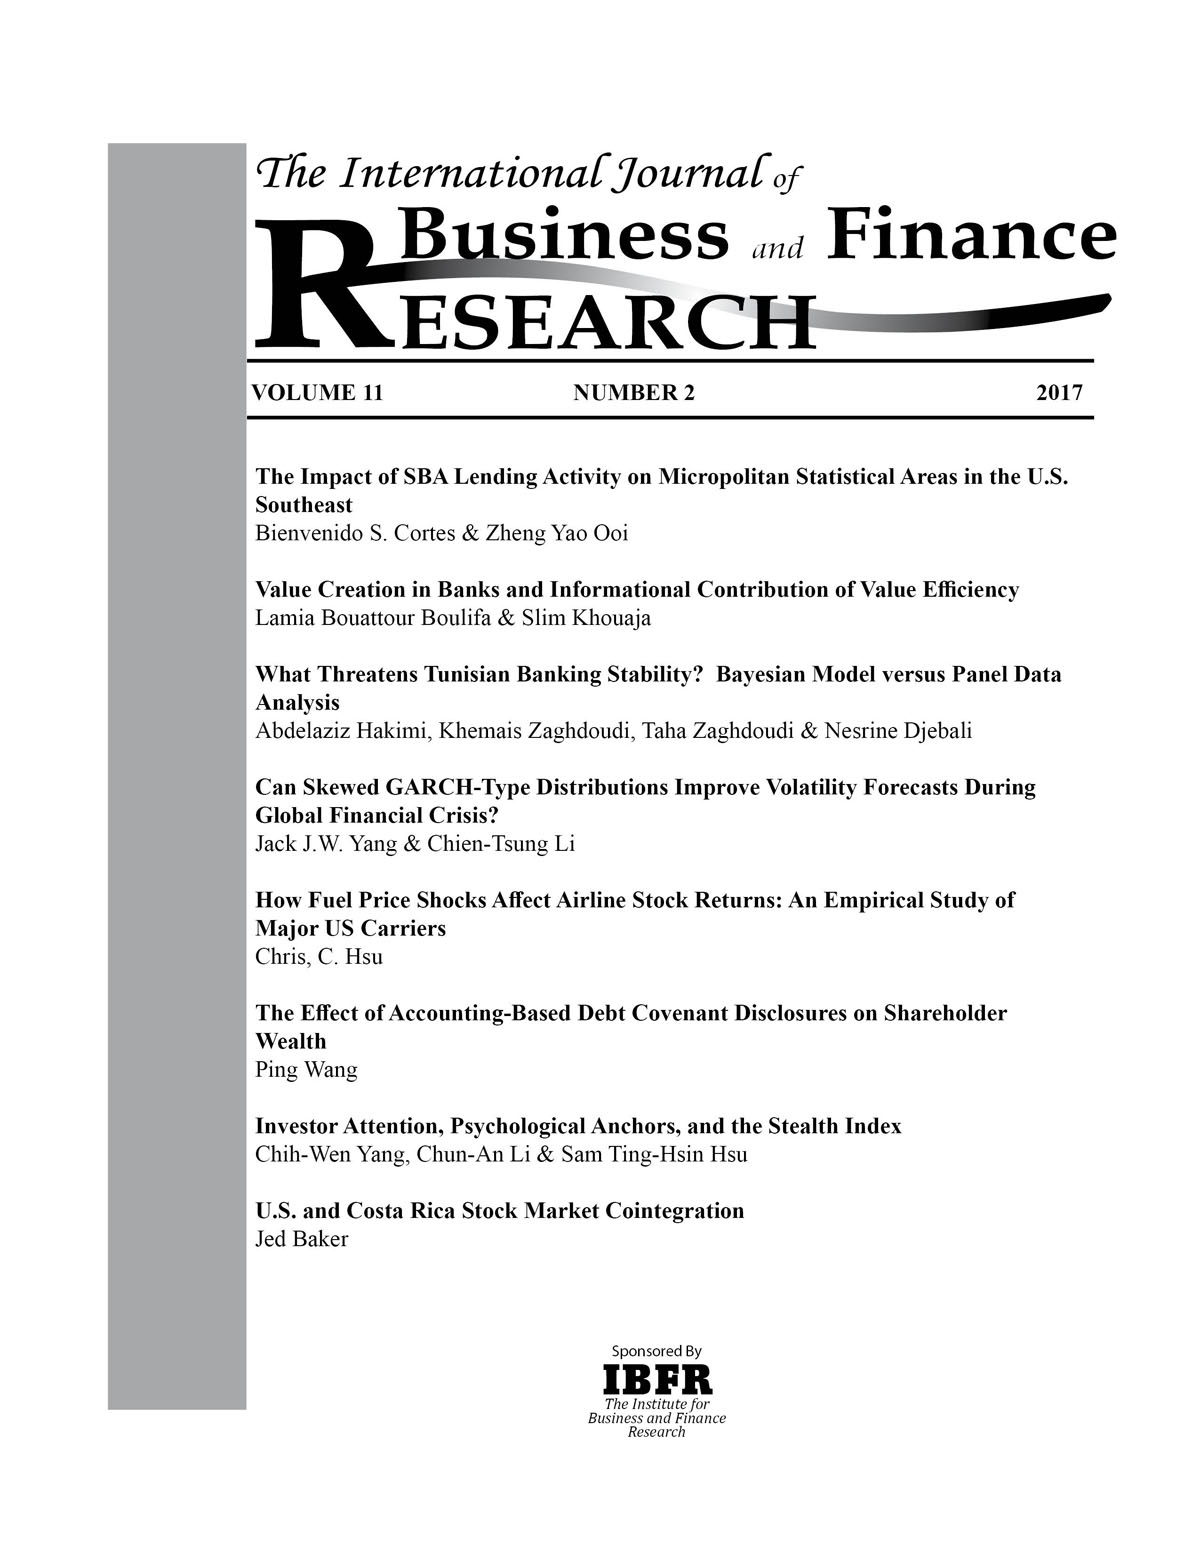 research articles on finance pdf